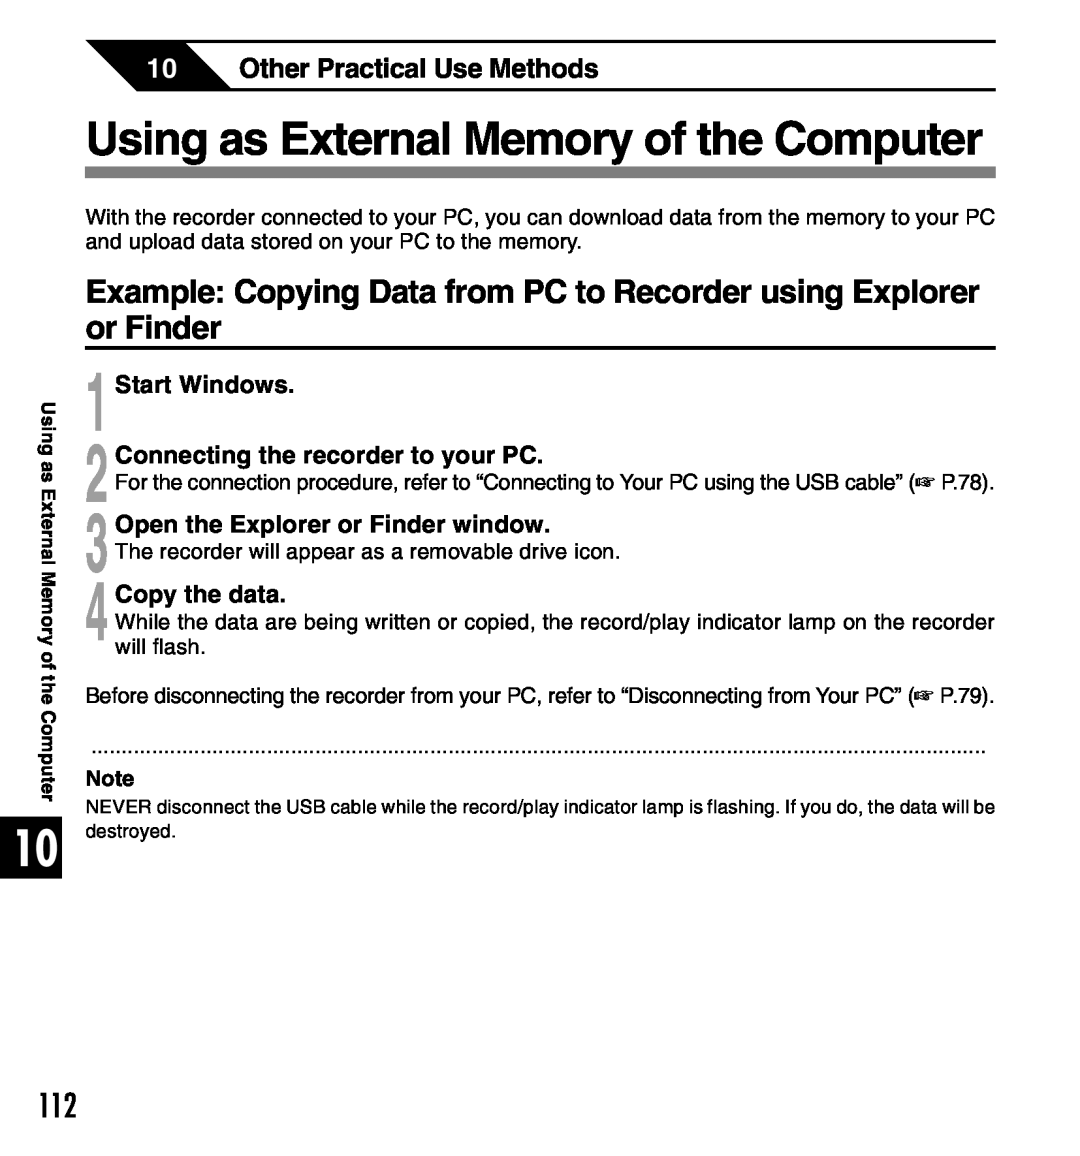 Olympus 2 Using as External Memory of the Computer, Example Copying Data from PC to Recorder using Explorer or Finder 